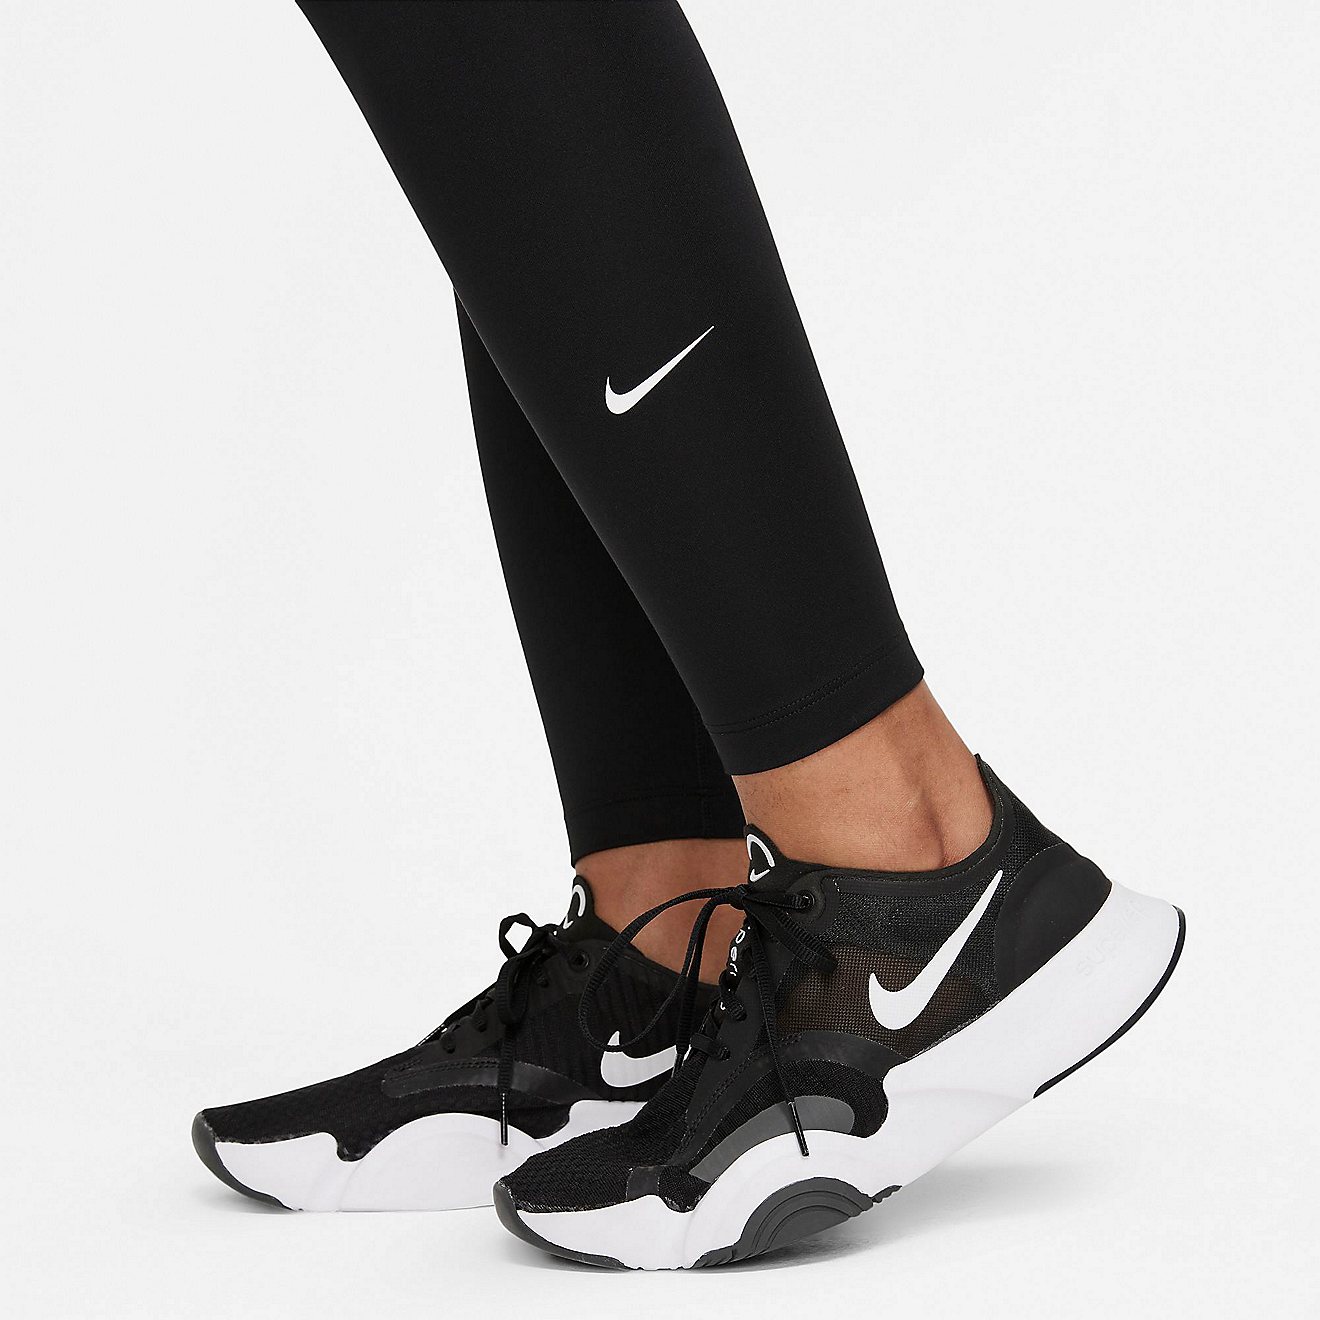 Nike Women's Dri-FIT One Warm Mid-Rise Tights | Academy